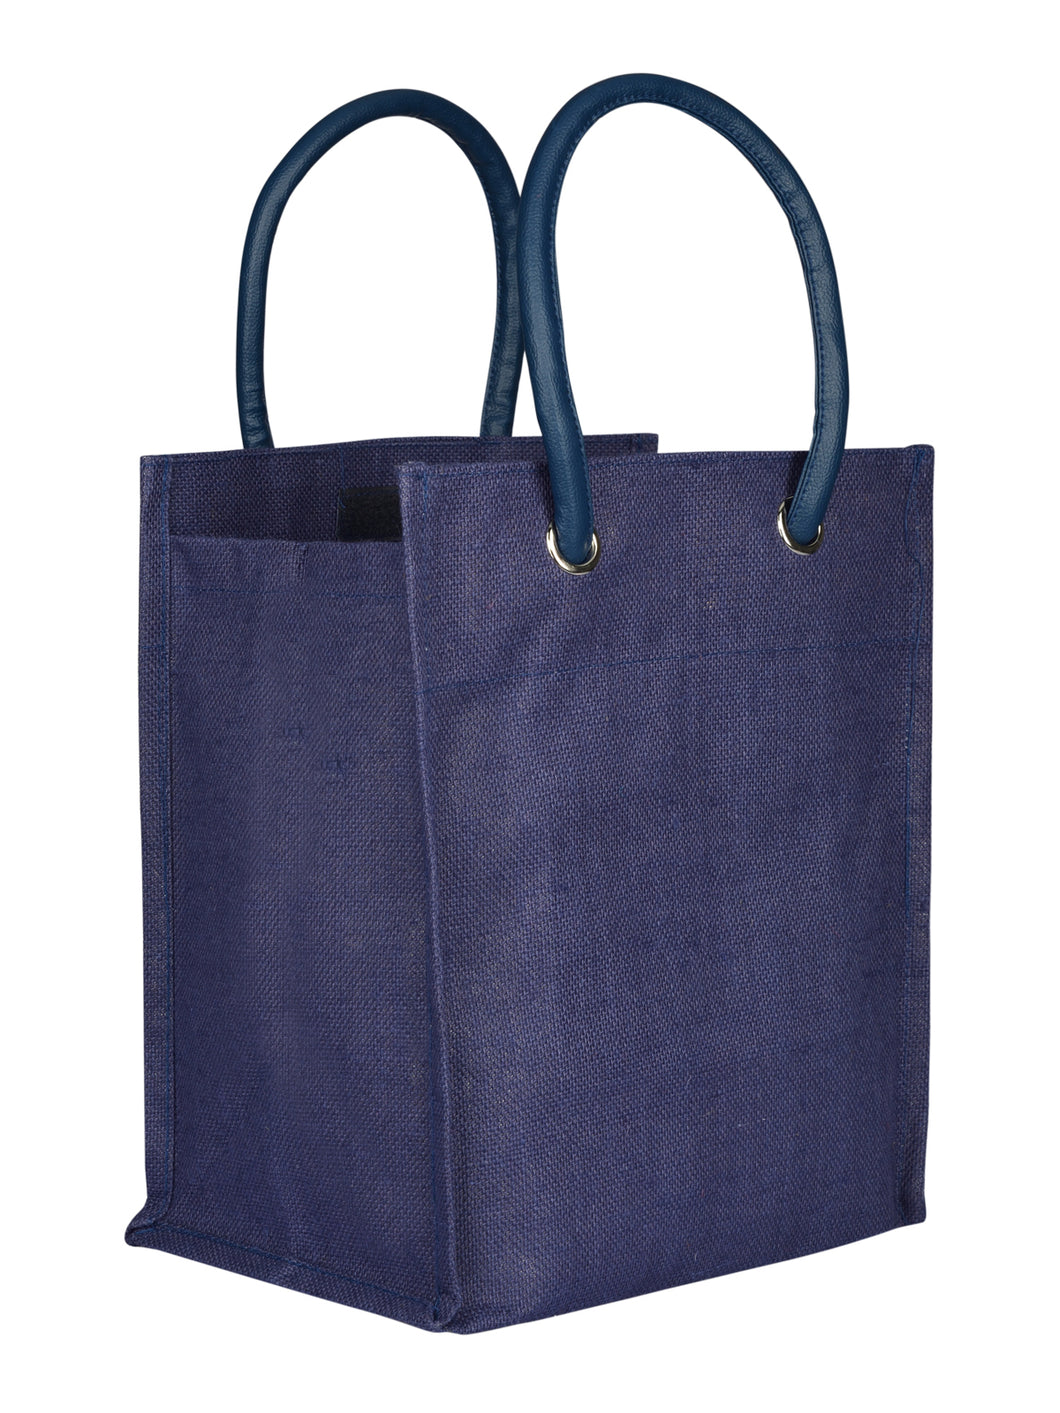 14 X 12 X 8 - BIG EYELET LUNCH WITH BASE (B-033-NAVY BLUE)